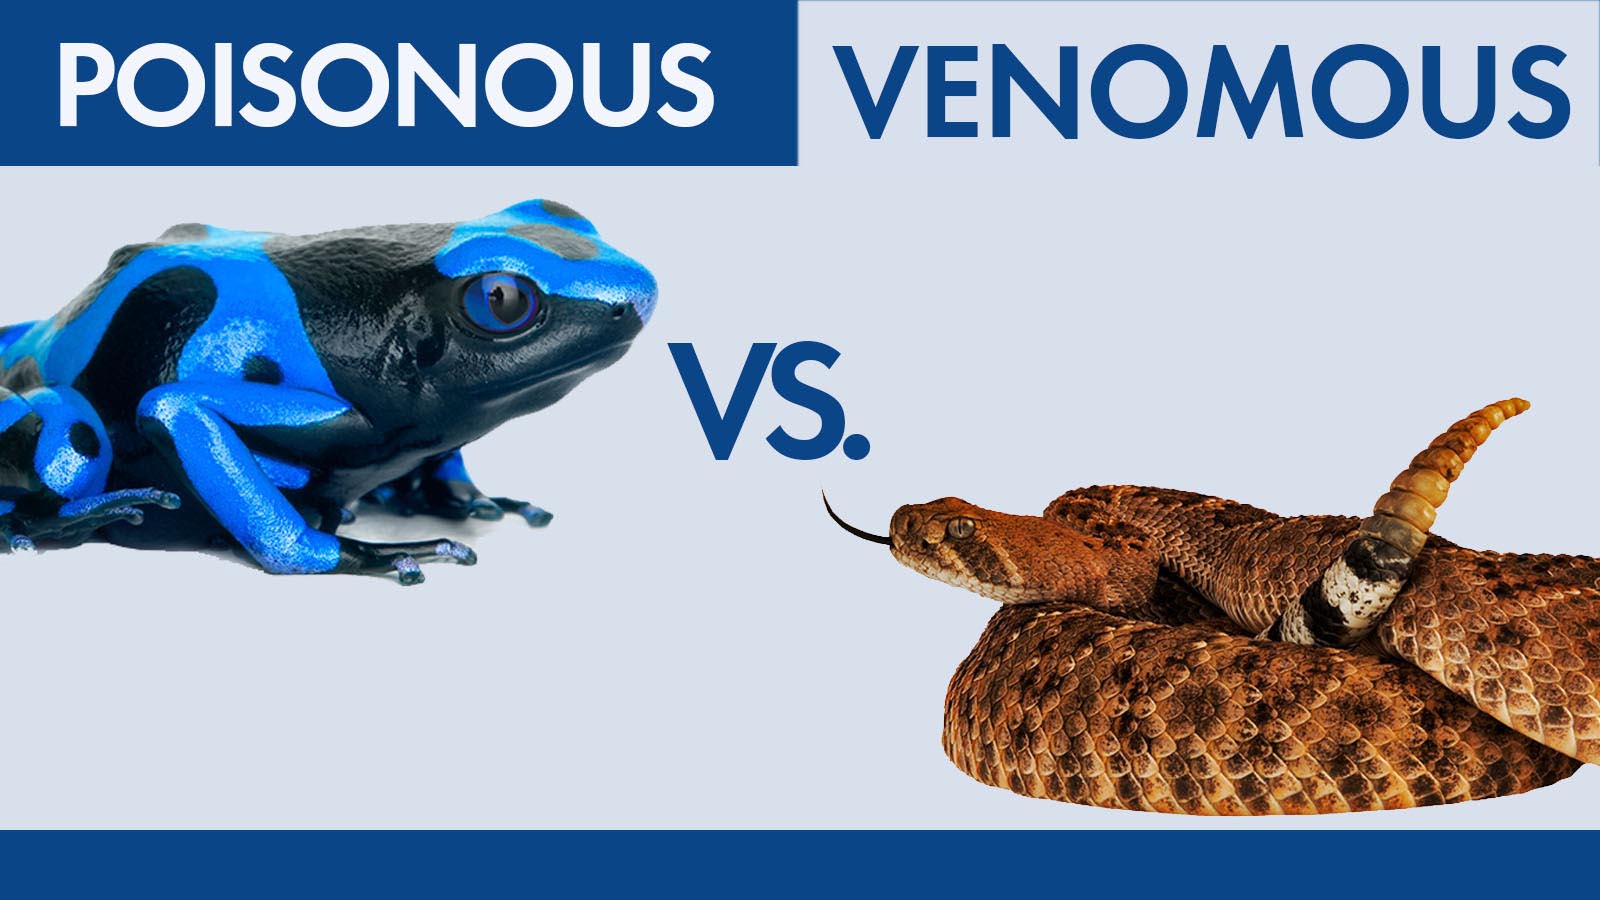 What is difference between poisonous and venomous?